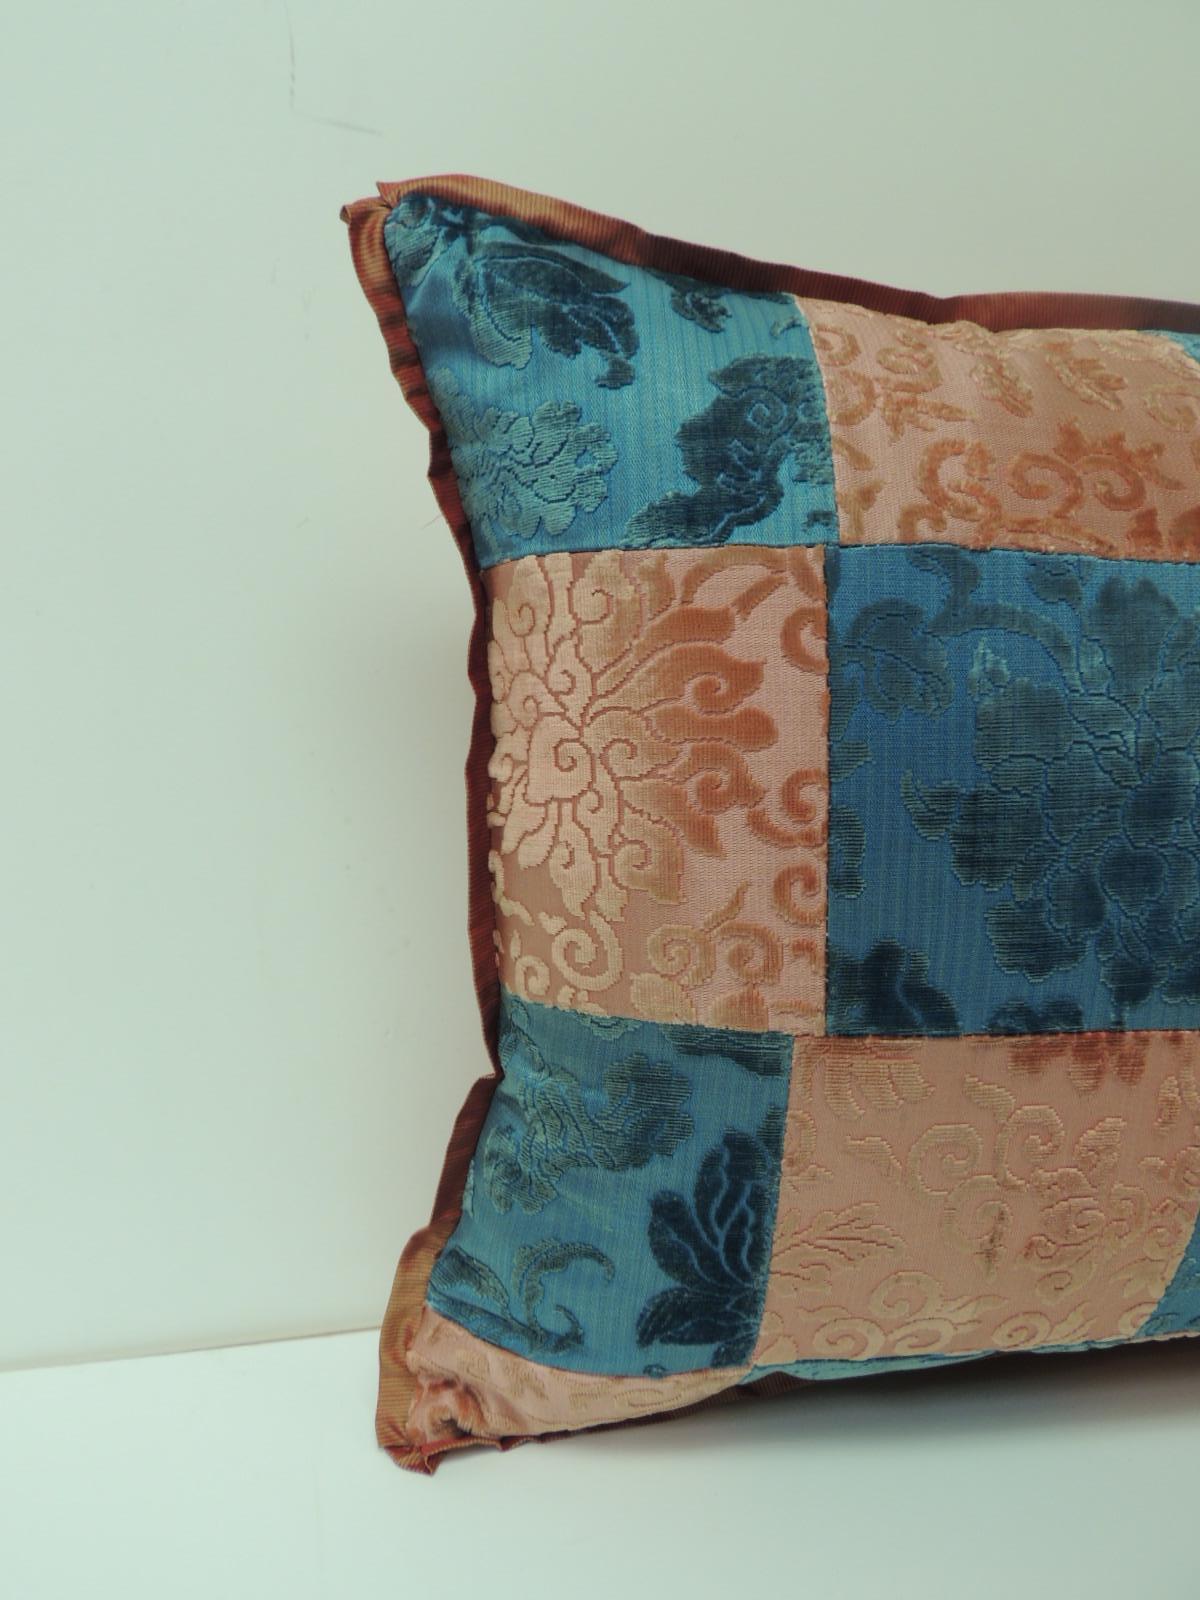 Pink and blue romance through the Gilded Age’s Asian textiles patchwork Lumbar pillow.
Decorative pillow handcrafted from two Asian antique textiles combining floral silk cut velvet gaufrage in pink with chrysanthemums motifs and blue clouds. These